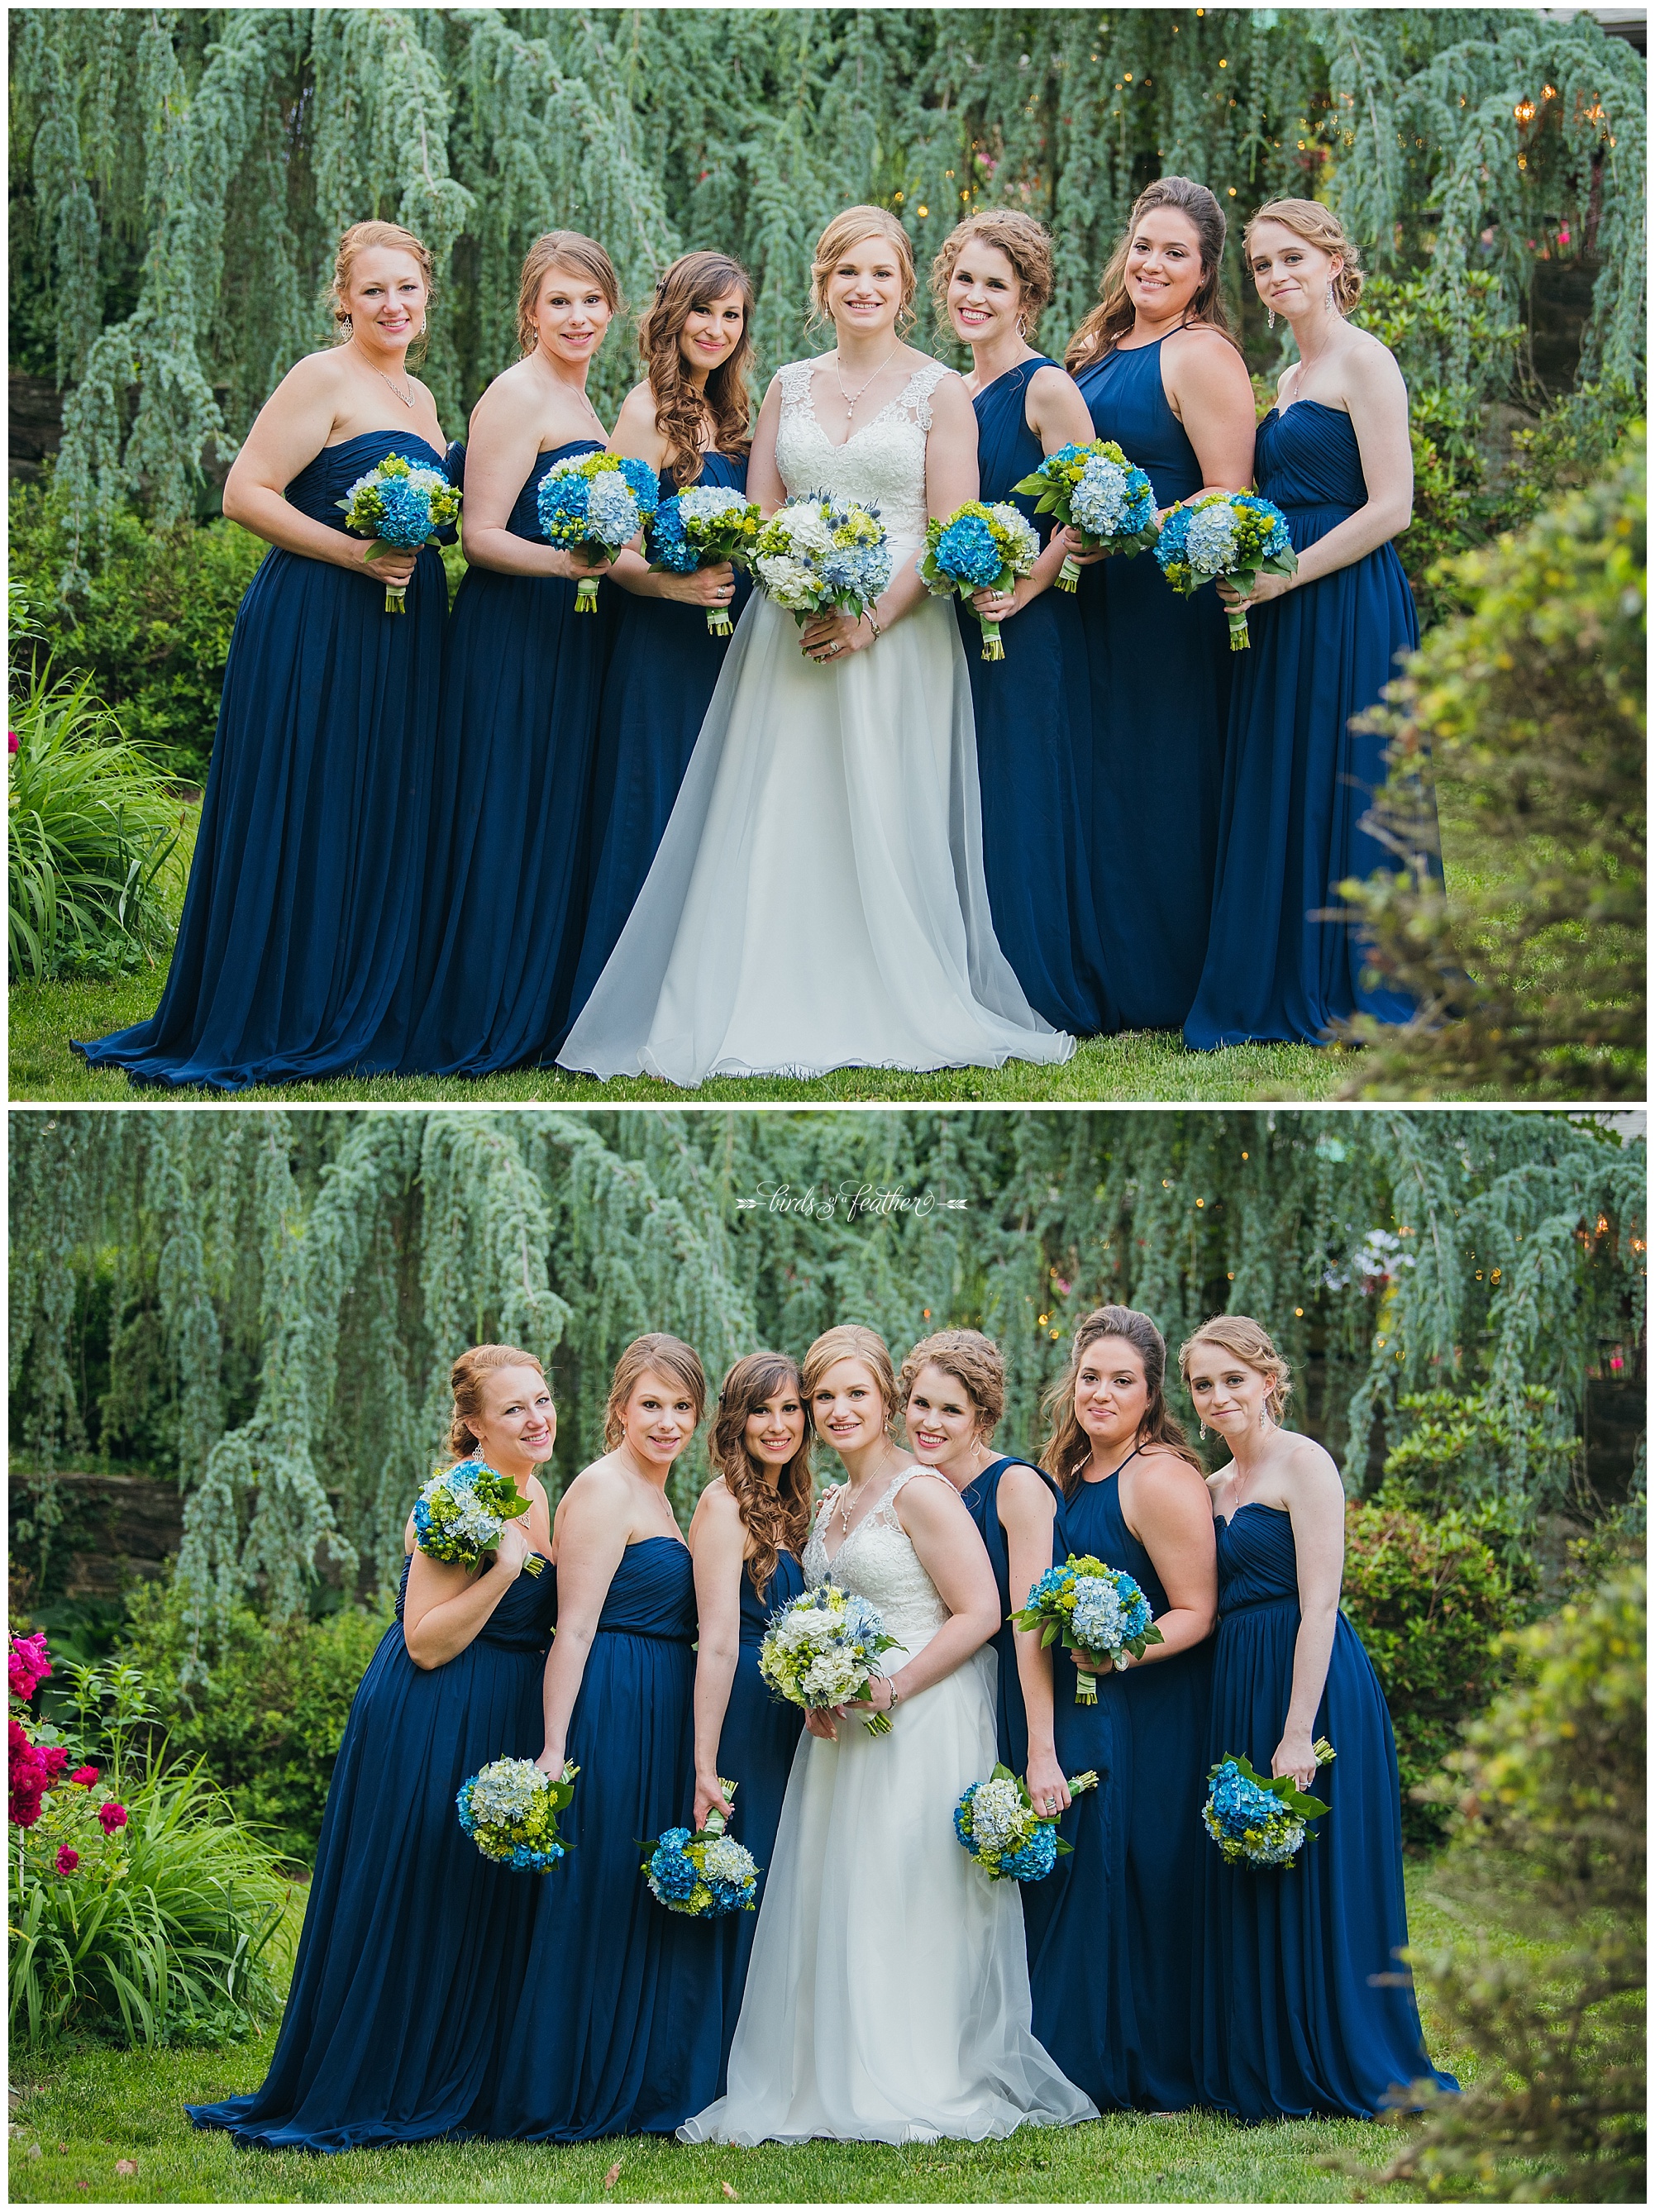 Birds of a Feather Photography, Riverdale Manor Wedding, Lancaster Pa, Wedding Photography, Wedding Photographer